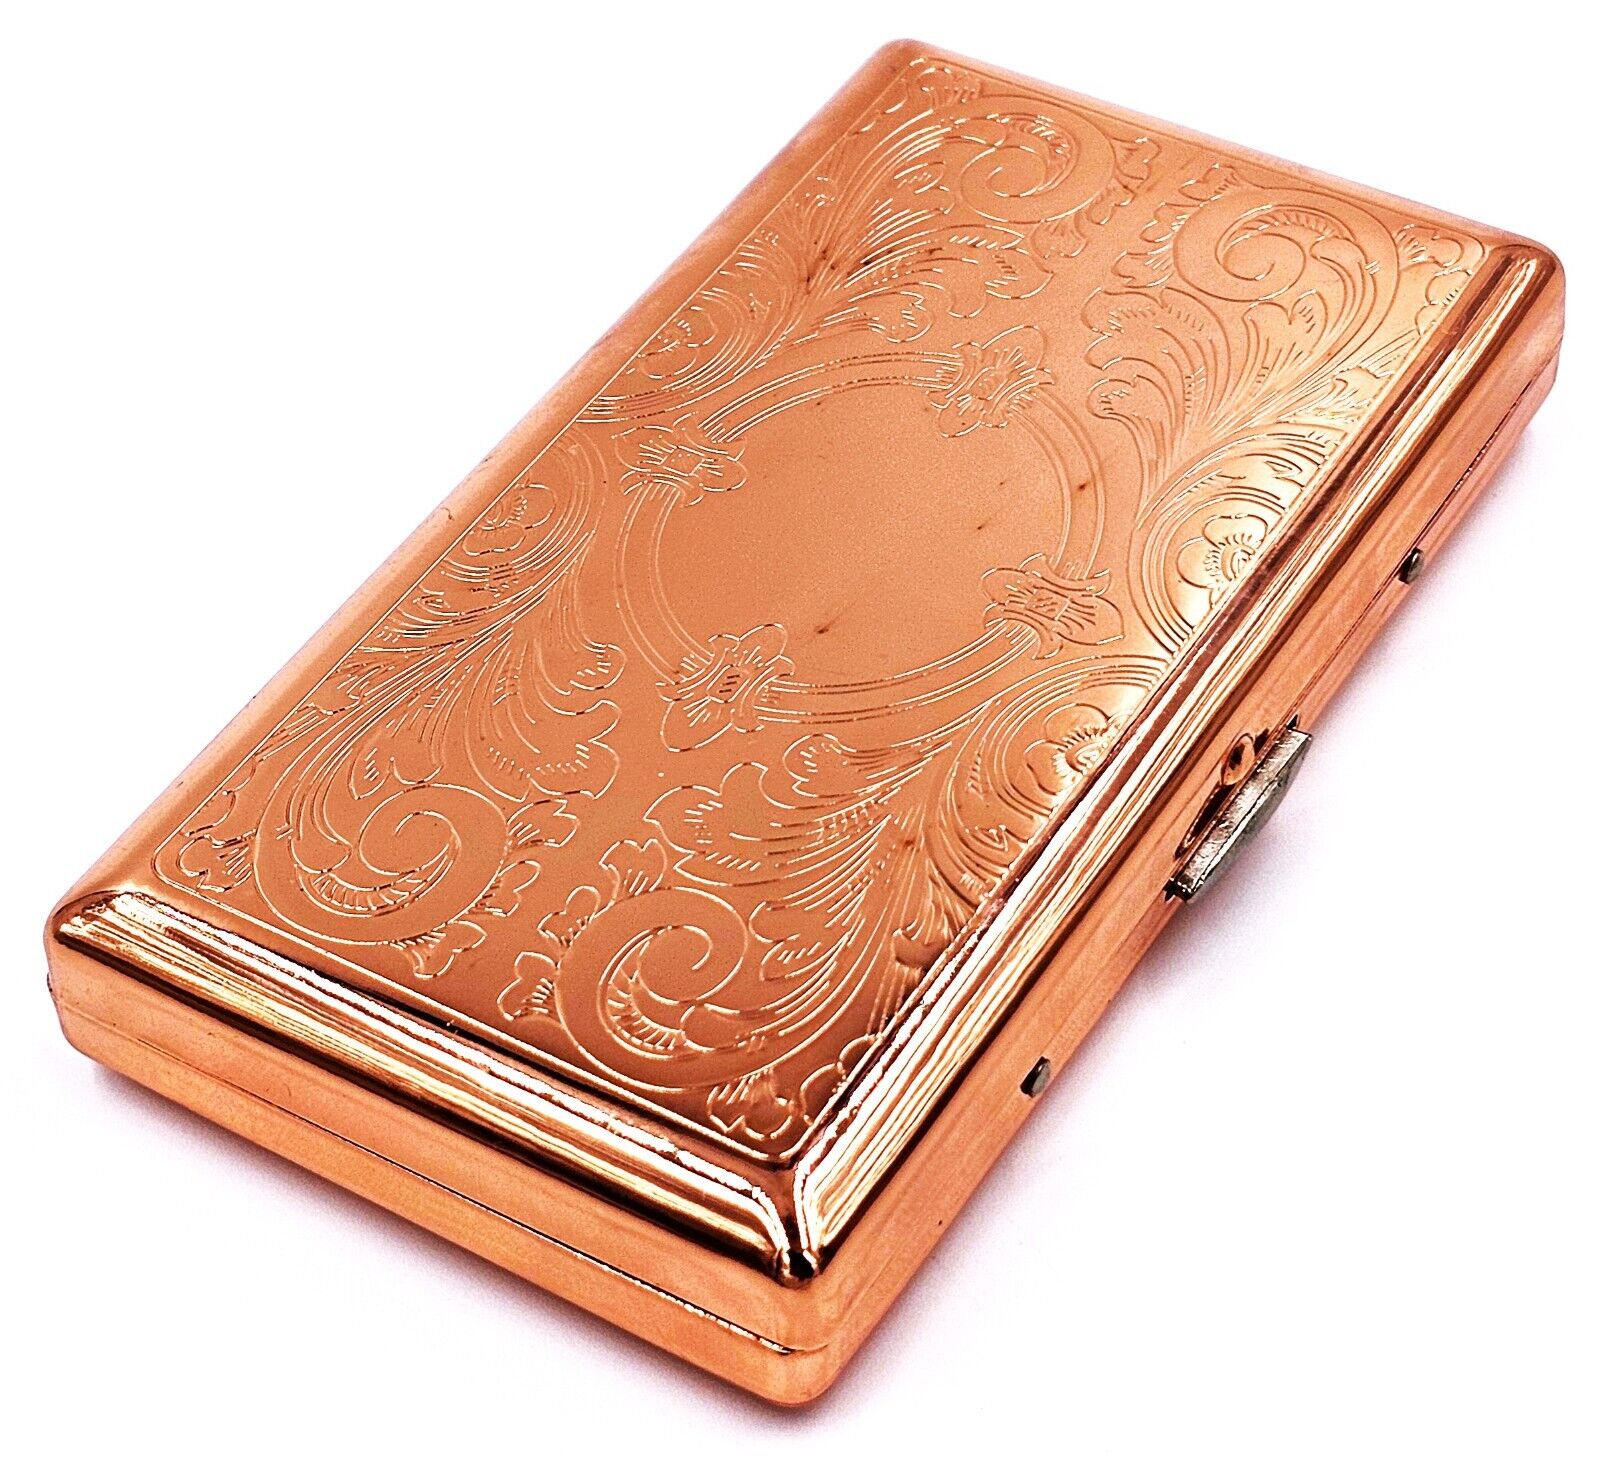 Retro Cigarette Case Double Sided King & 100s Etched Rose Gold Color 4x2inch